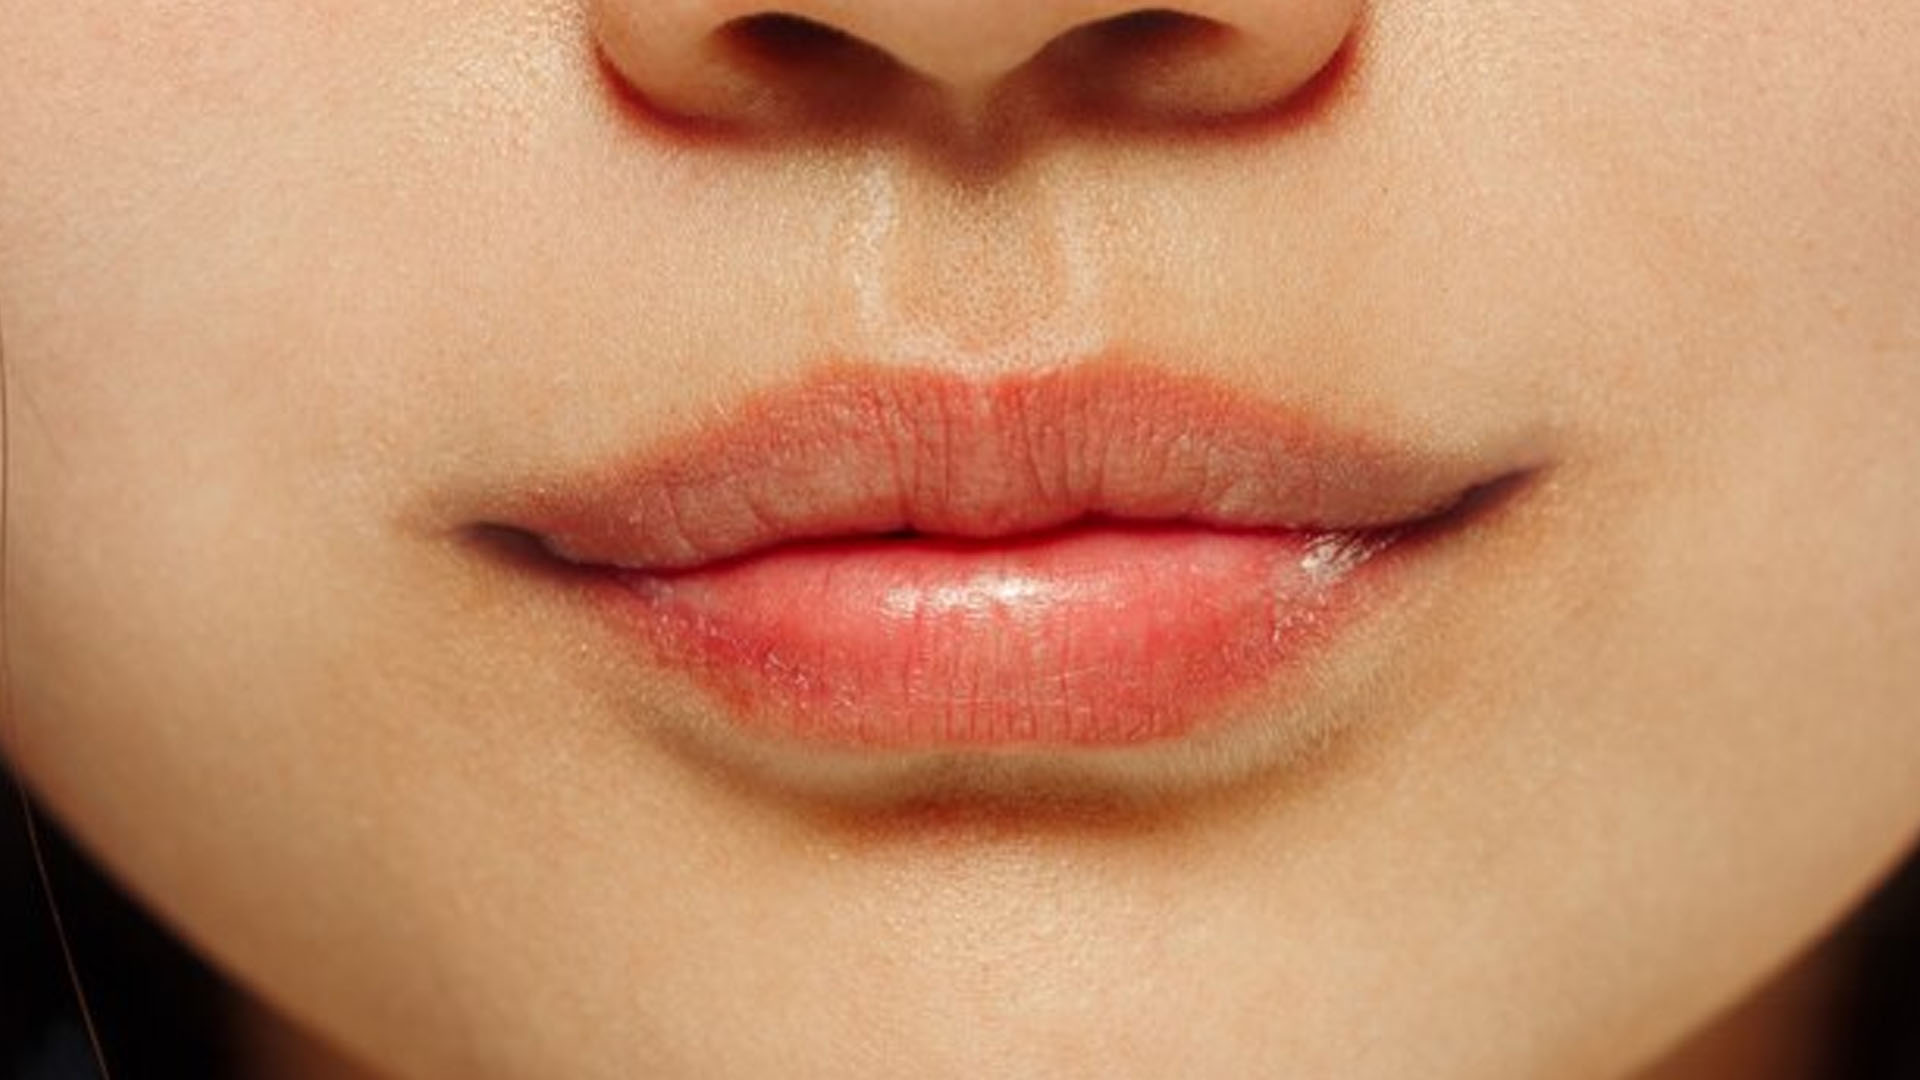 What are the Home Remedies for Lip Swelling?